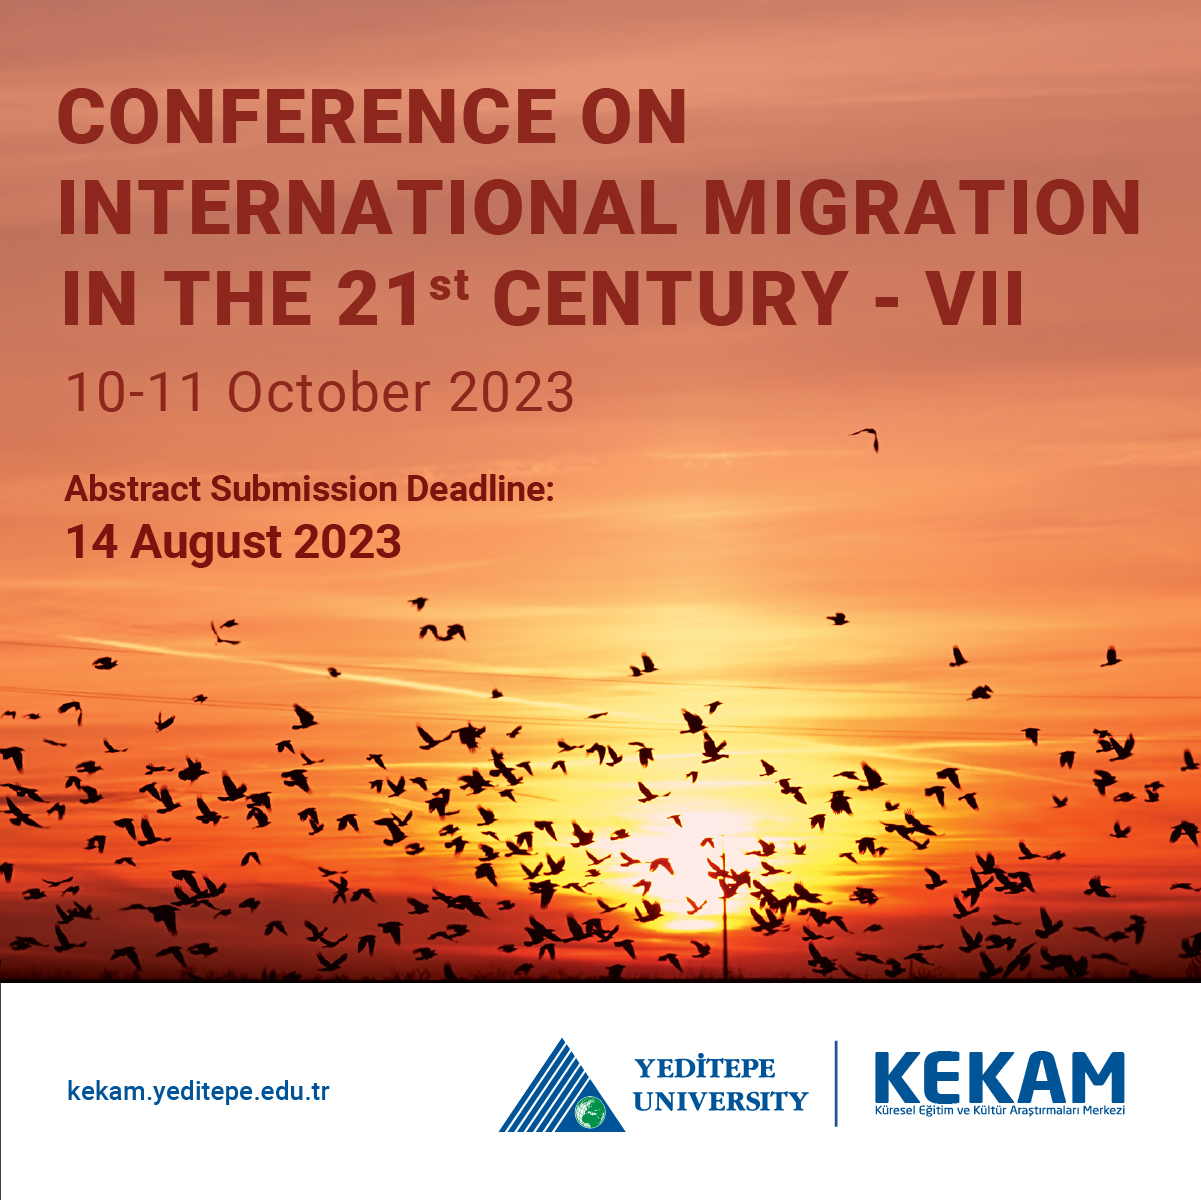 INTERNATIONAL MIGRATION IN THE 21st CENTURY